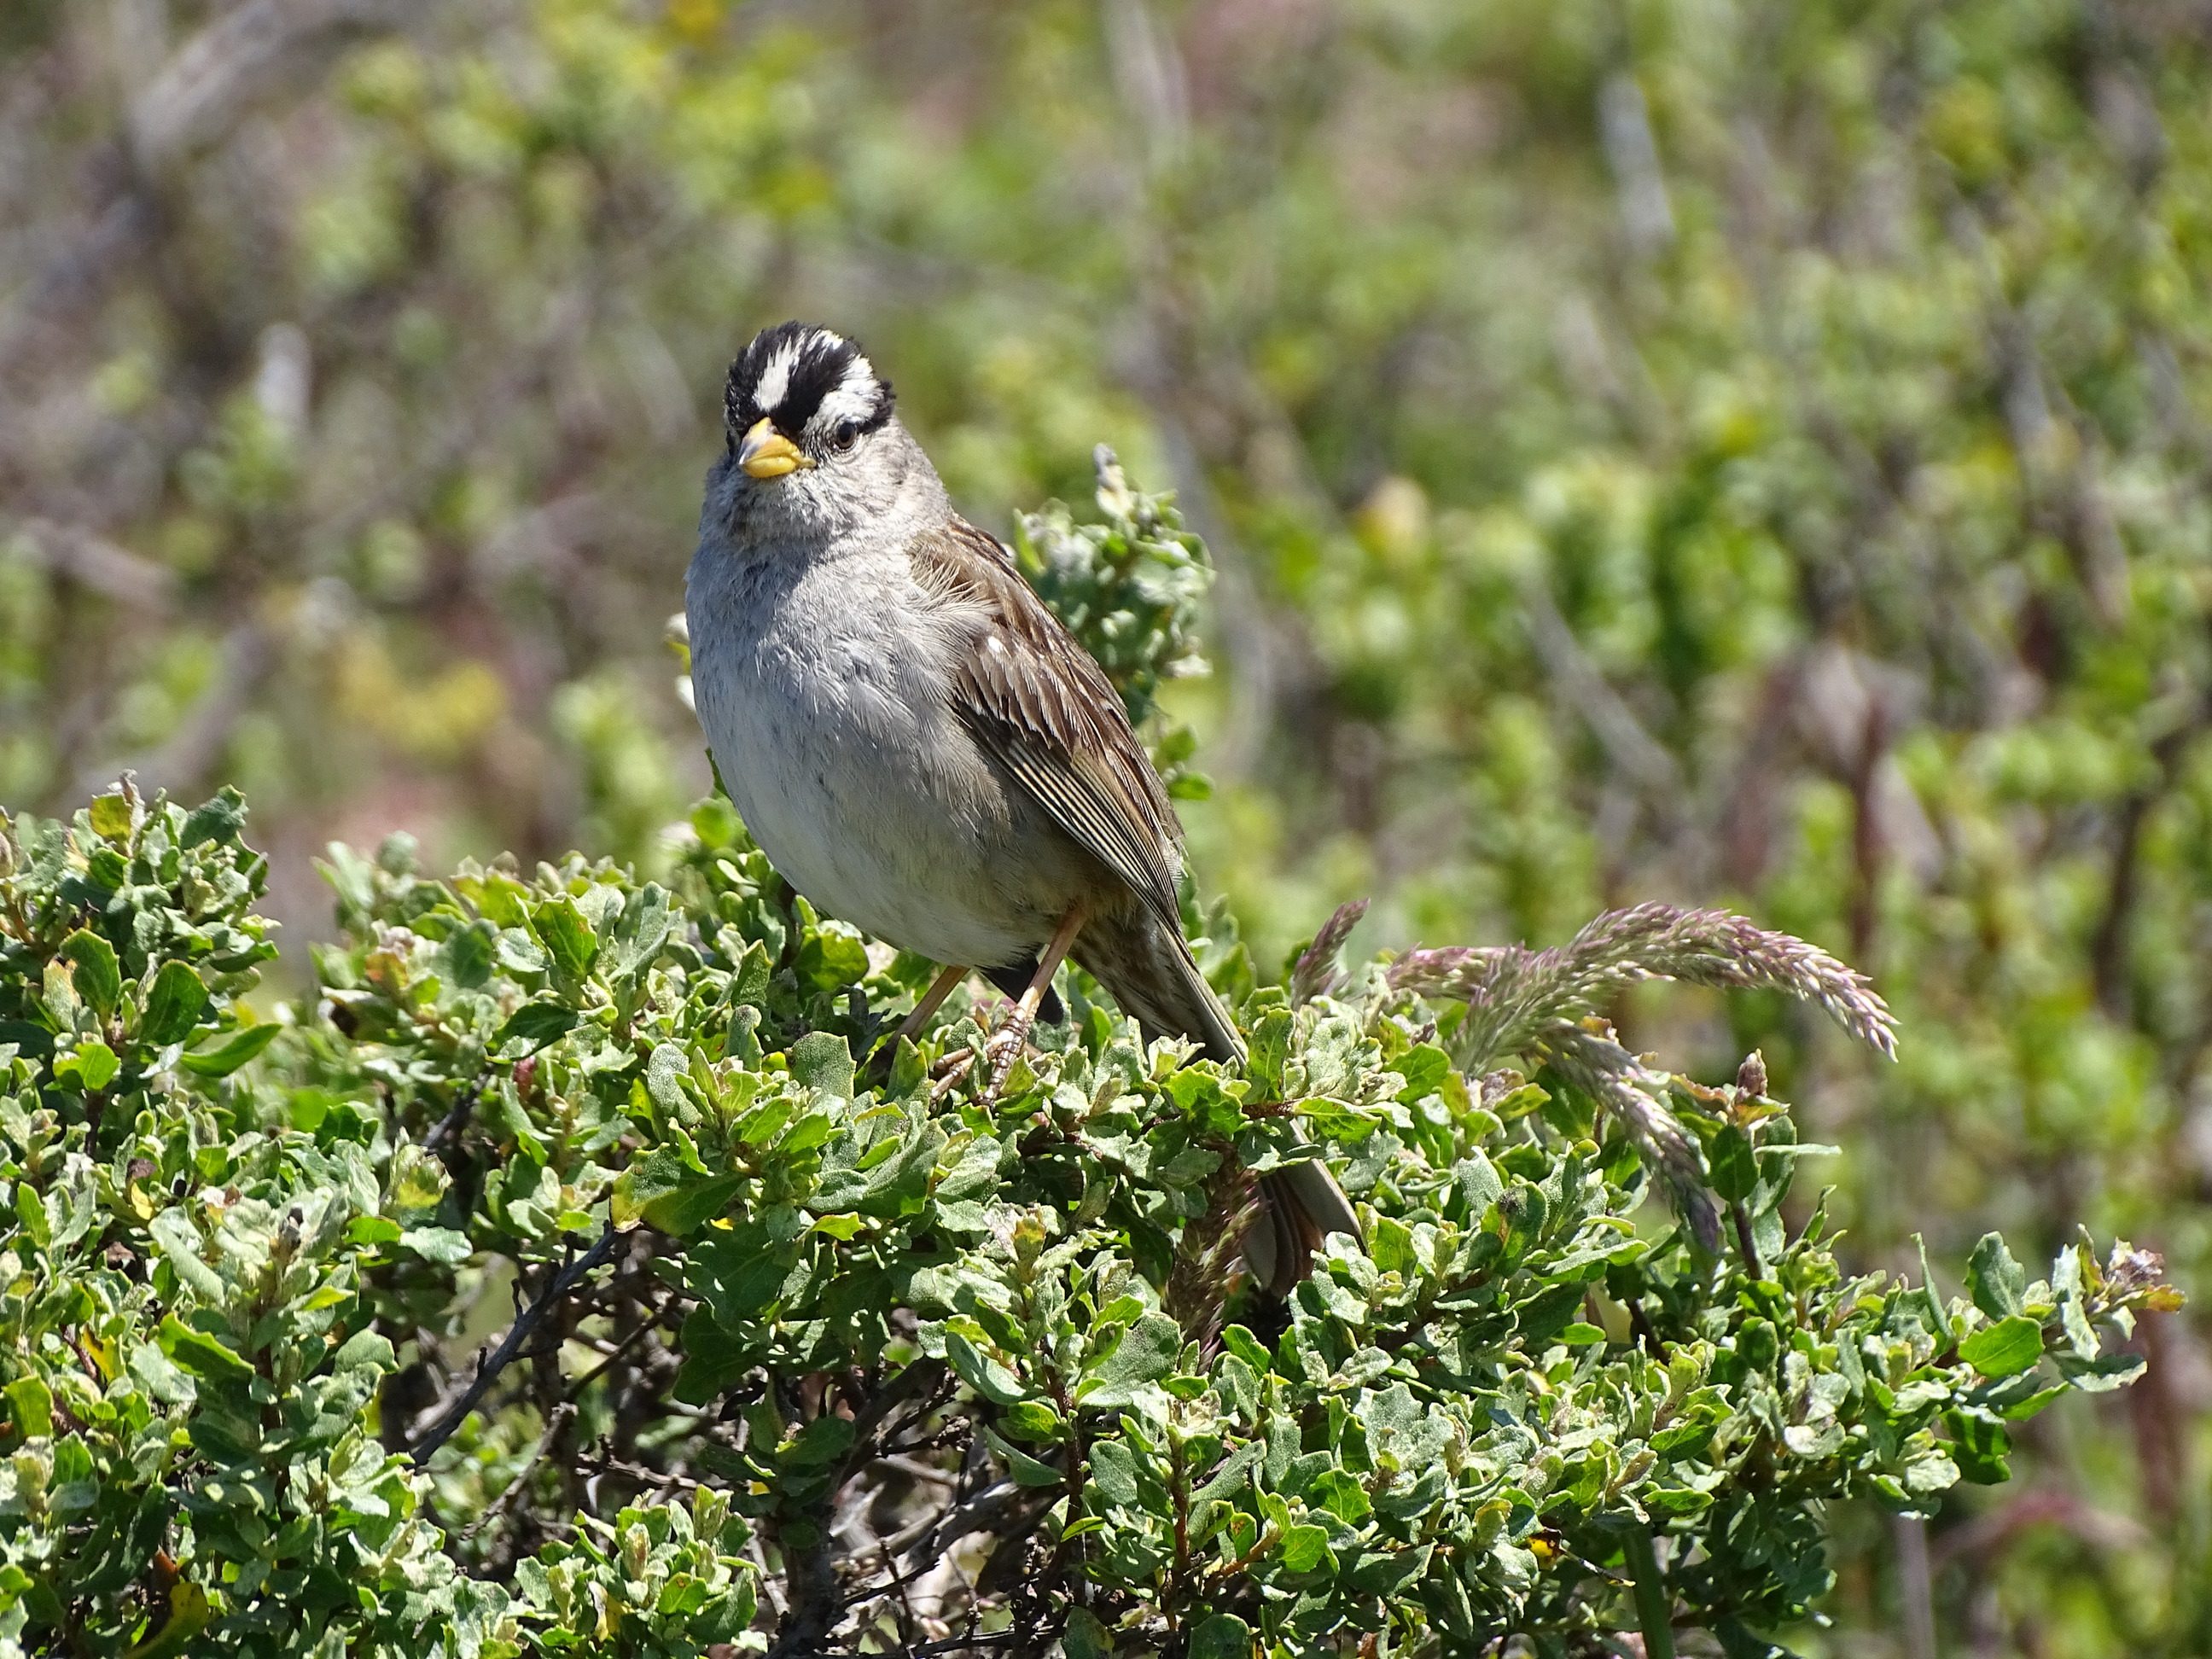 A small sparrow with a yellow bill, white and black stripes on its head, and a grayish-brown back.